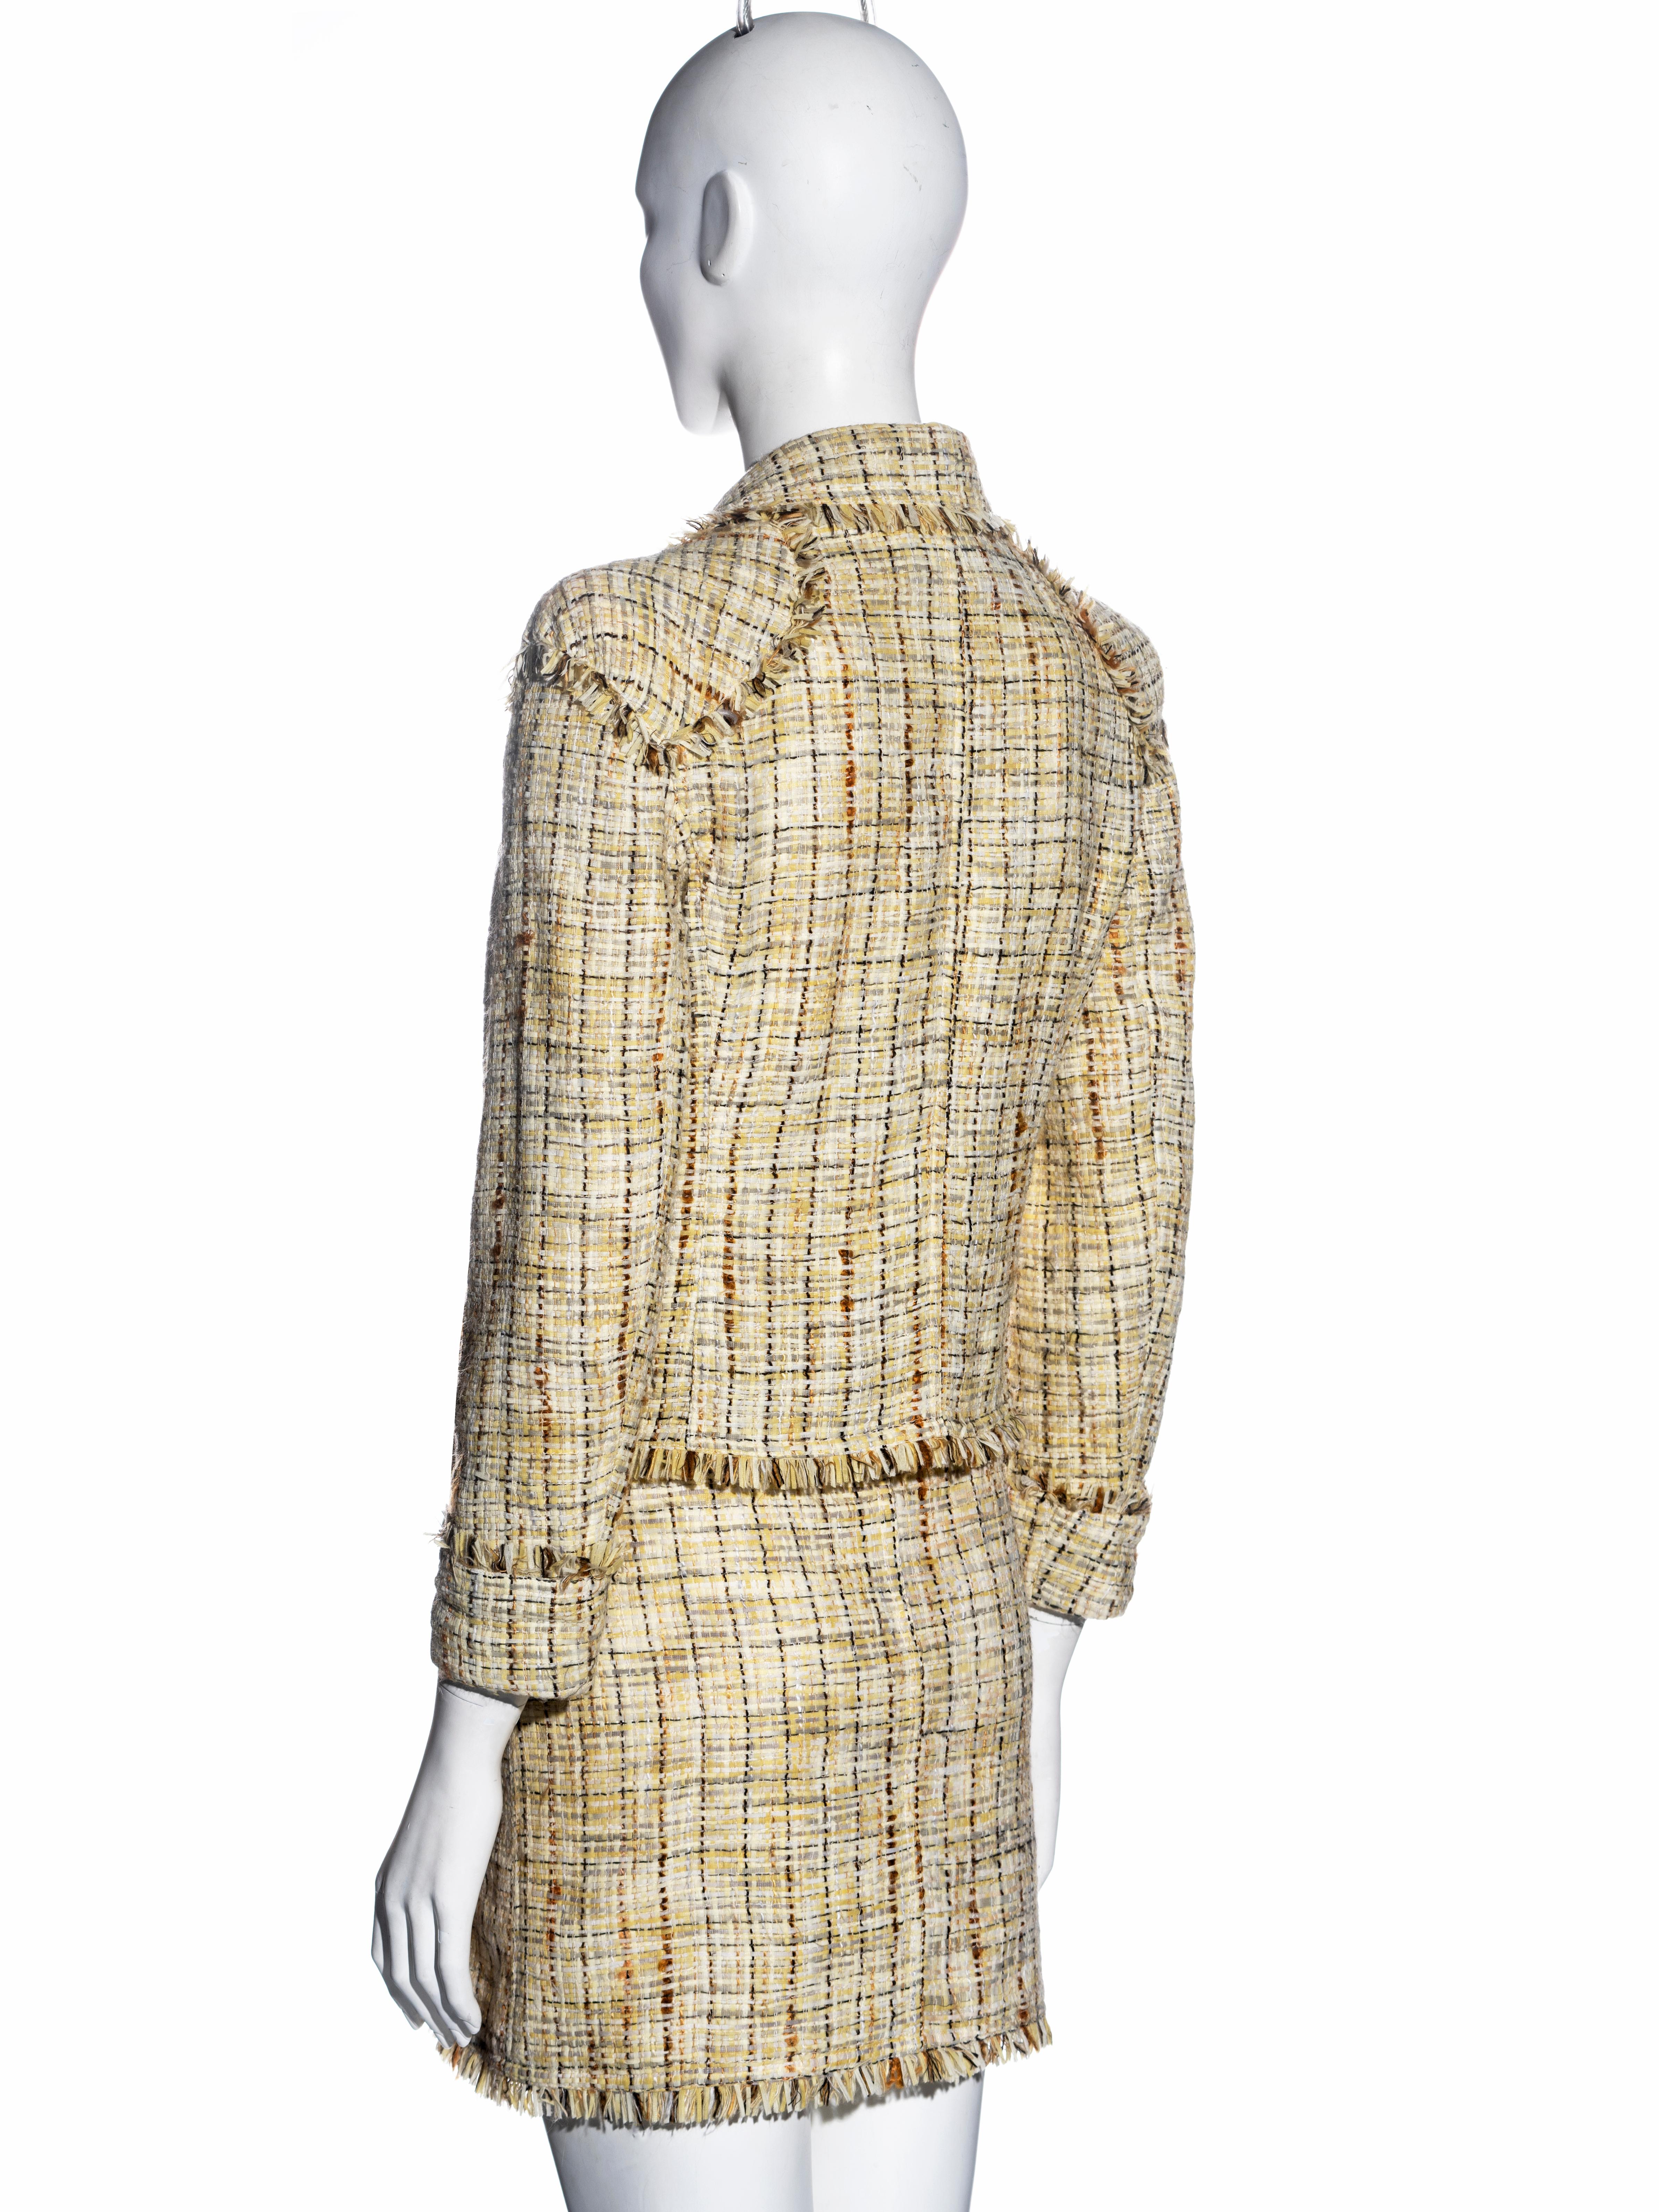 Chanel by Karl Lagerfeld yellow tweed jacket and skirt suit, ss 1998 For Sale 1